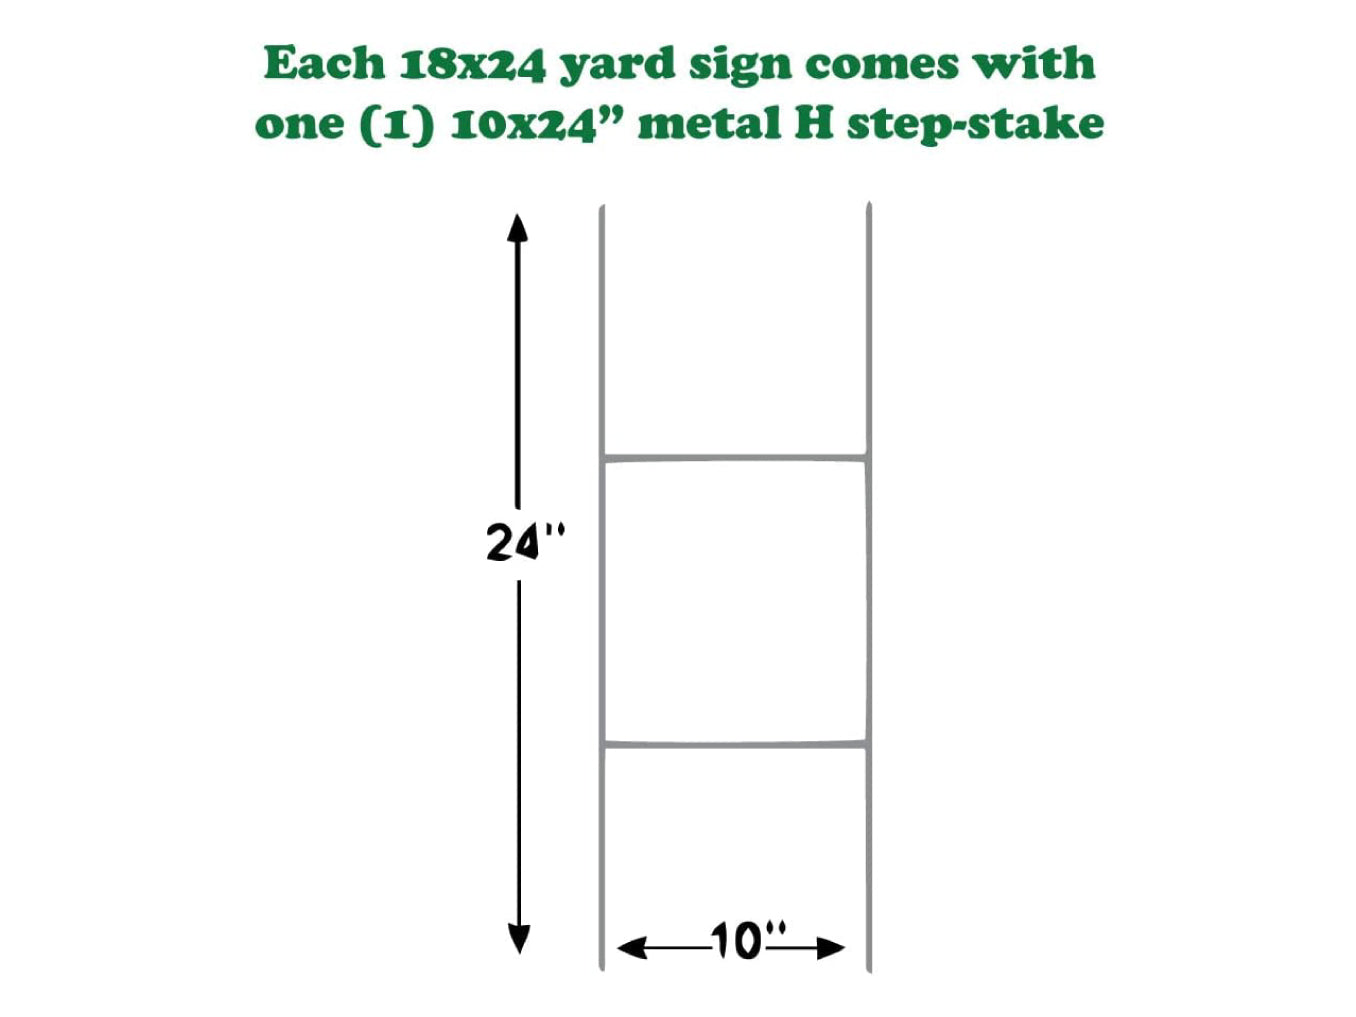 Hay Sold Here Sign, Yard Sign, 18x12, 24x18, 36x24, Double Sided, H-Stake Included, v2